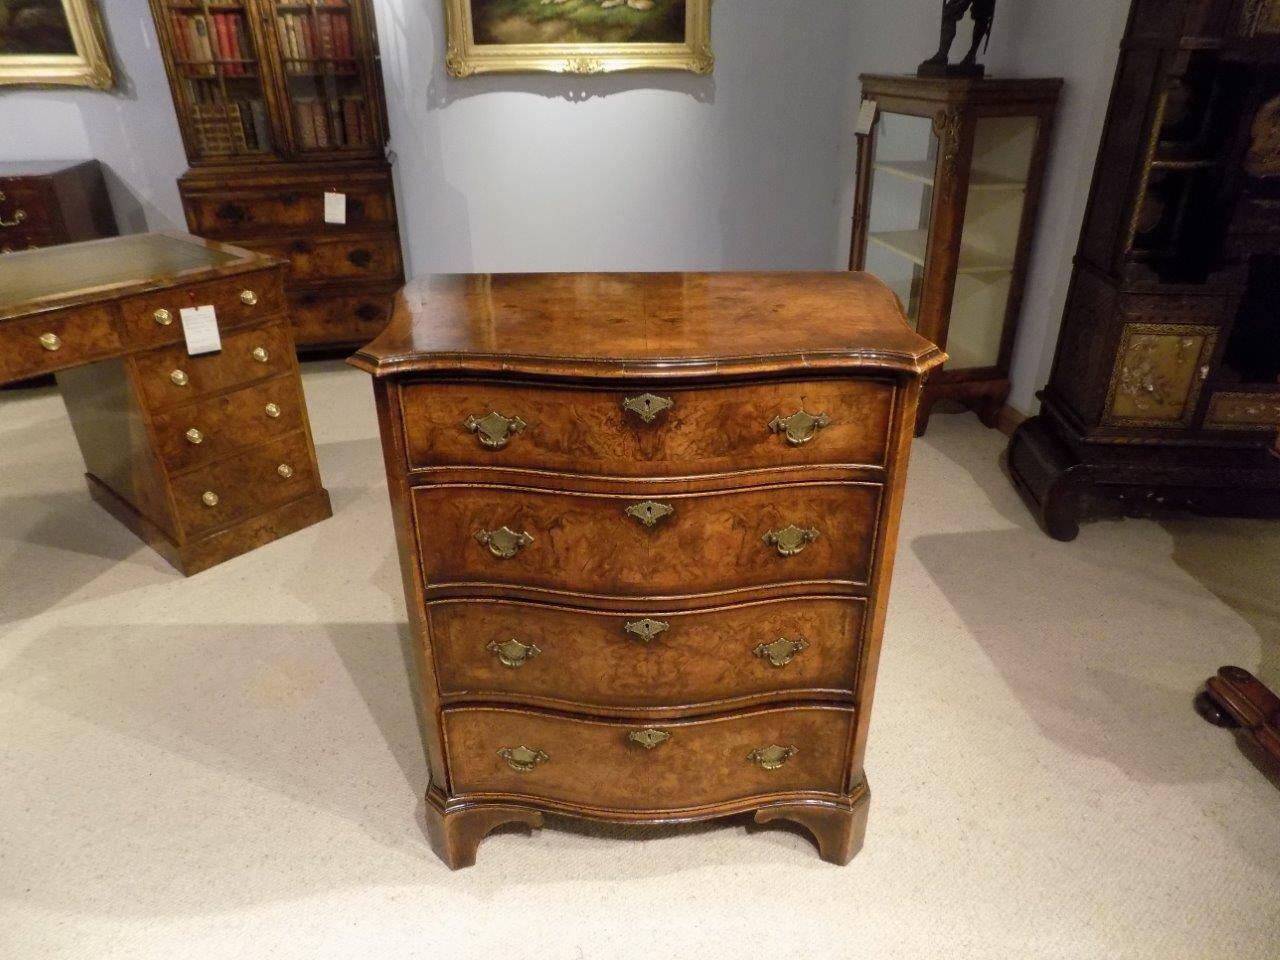 A burr walnut George II style burr serpentine chest of drawers. The top of serpentine outline being veneered in richly figured burr walnut with herringbone and walnut banding and a block moulded edge. The four graduating serpentine shaped drawers